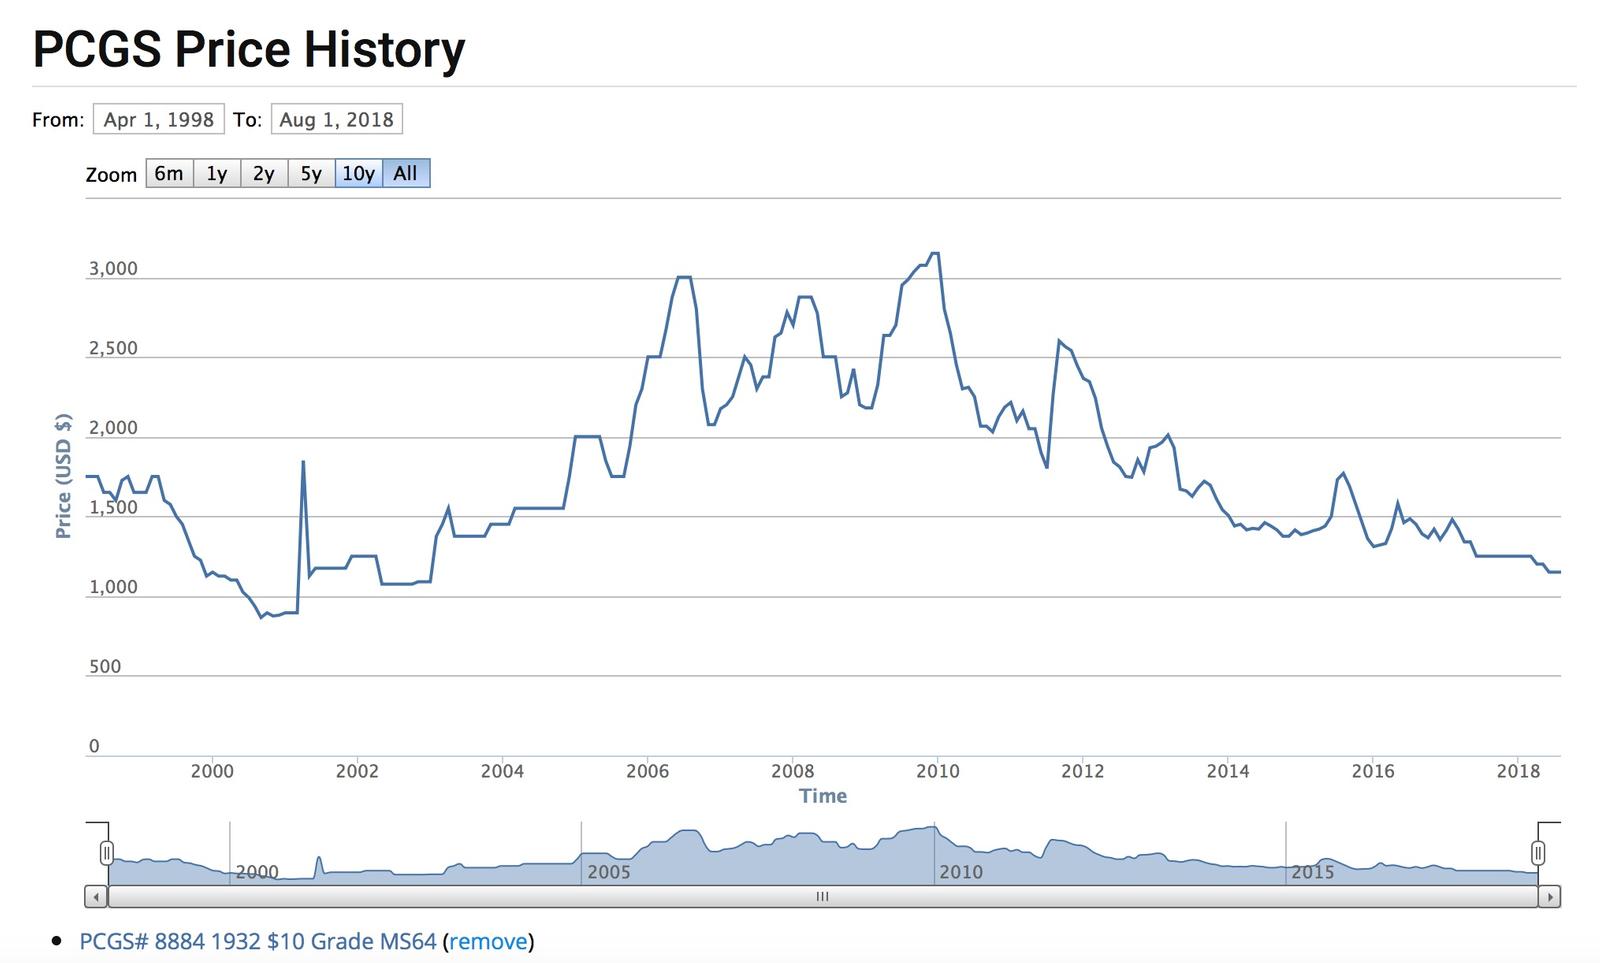 Line chart showing price history of $10 Indian MS 64